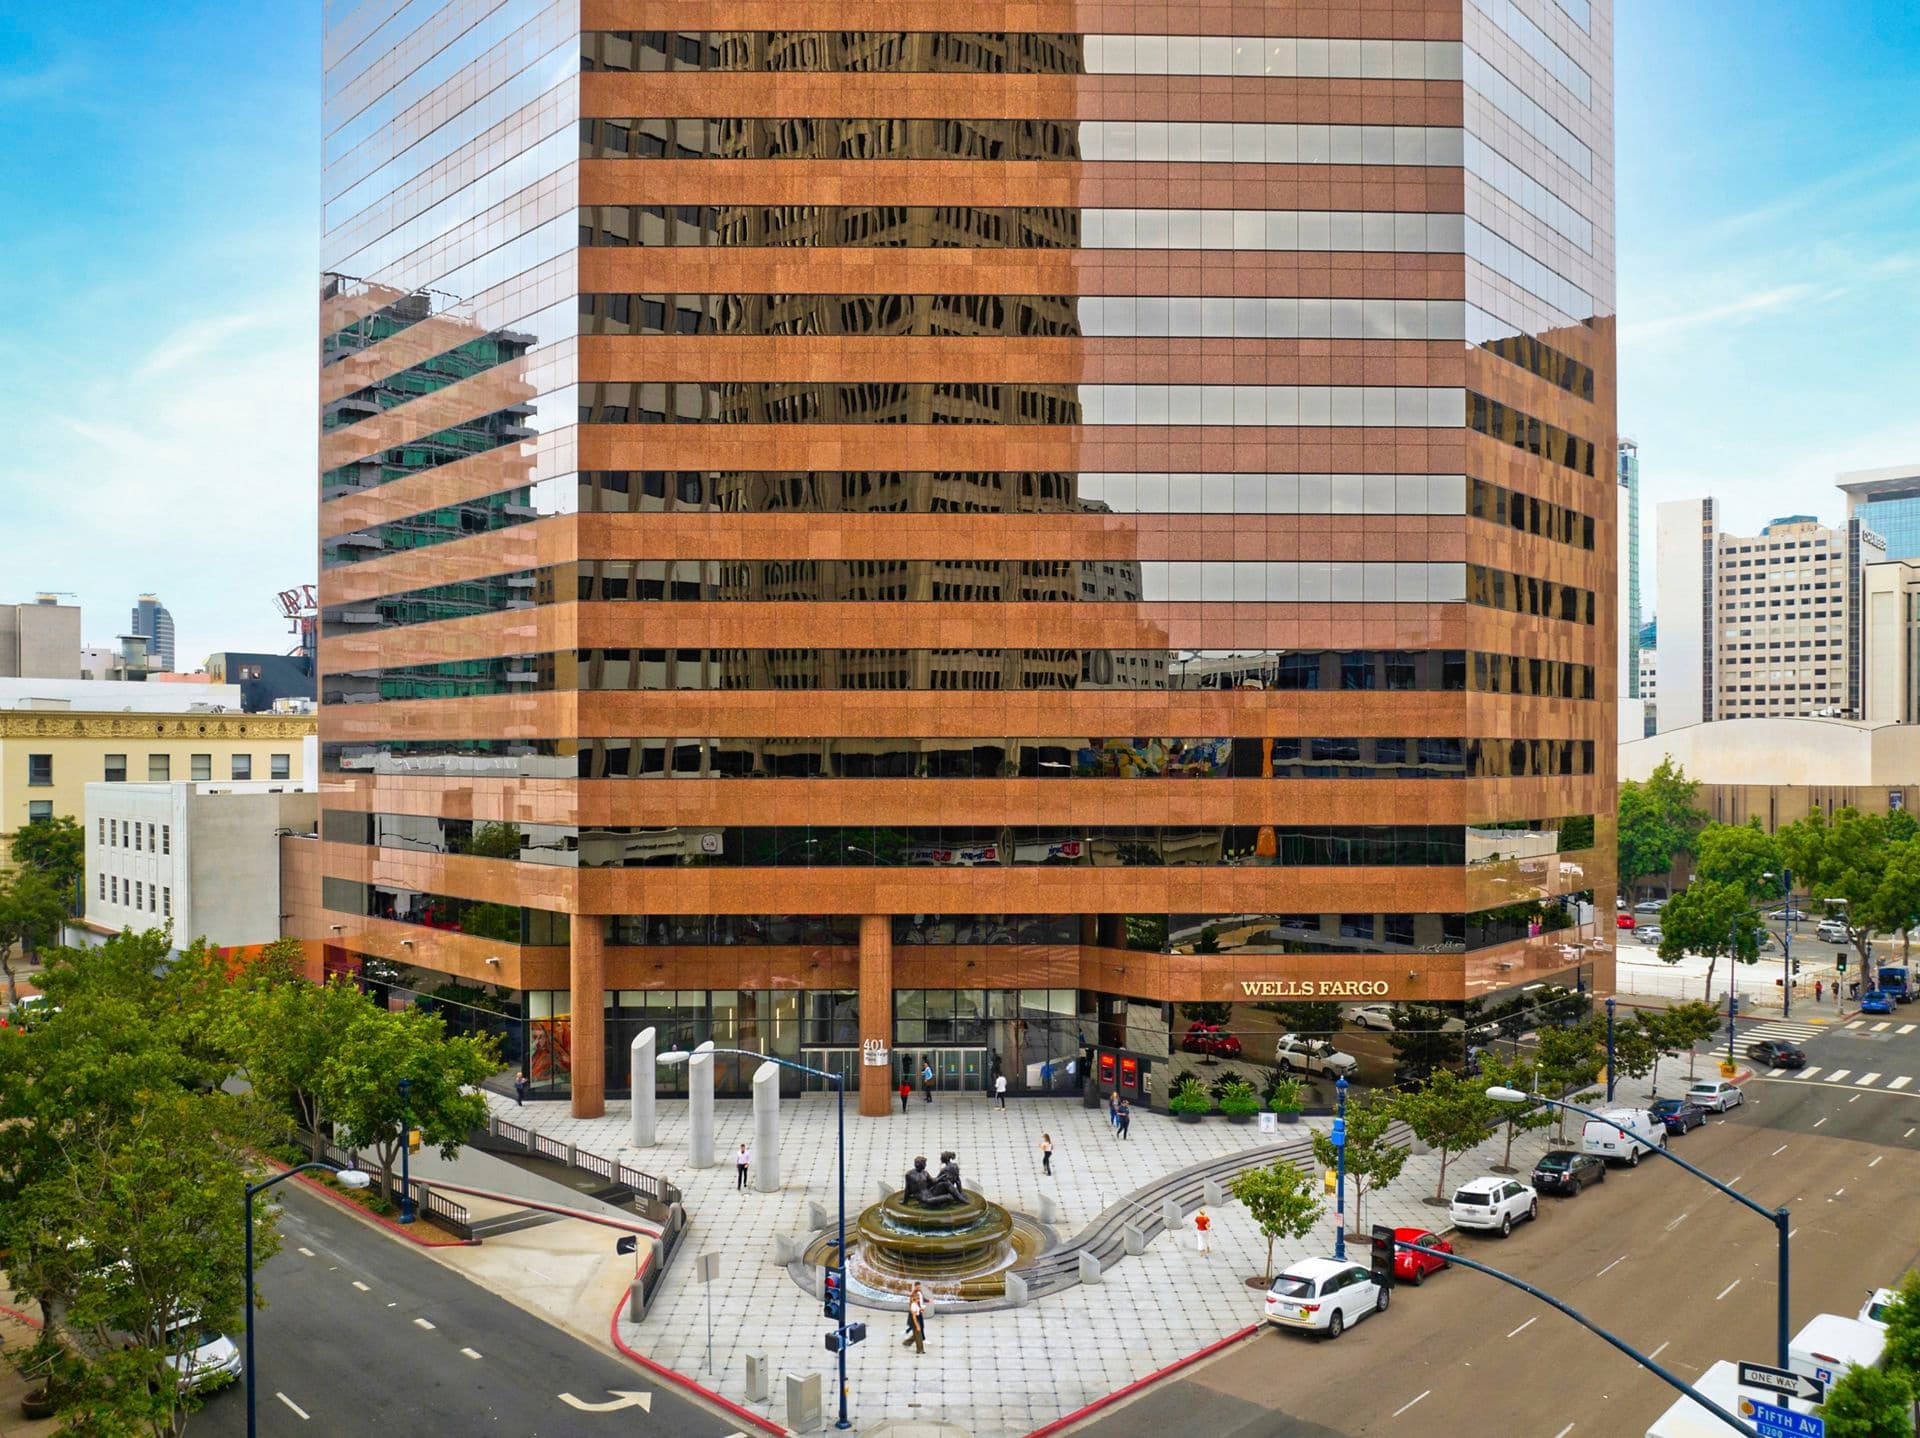 Exterior photography of the Wells Fargo Plaza building in San Diego, CA.